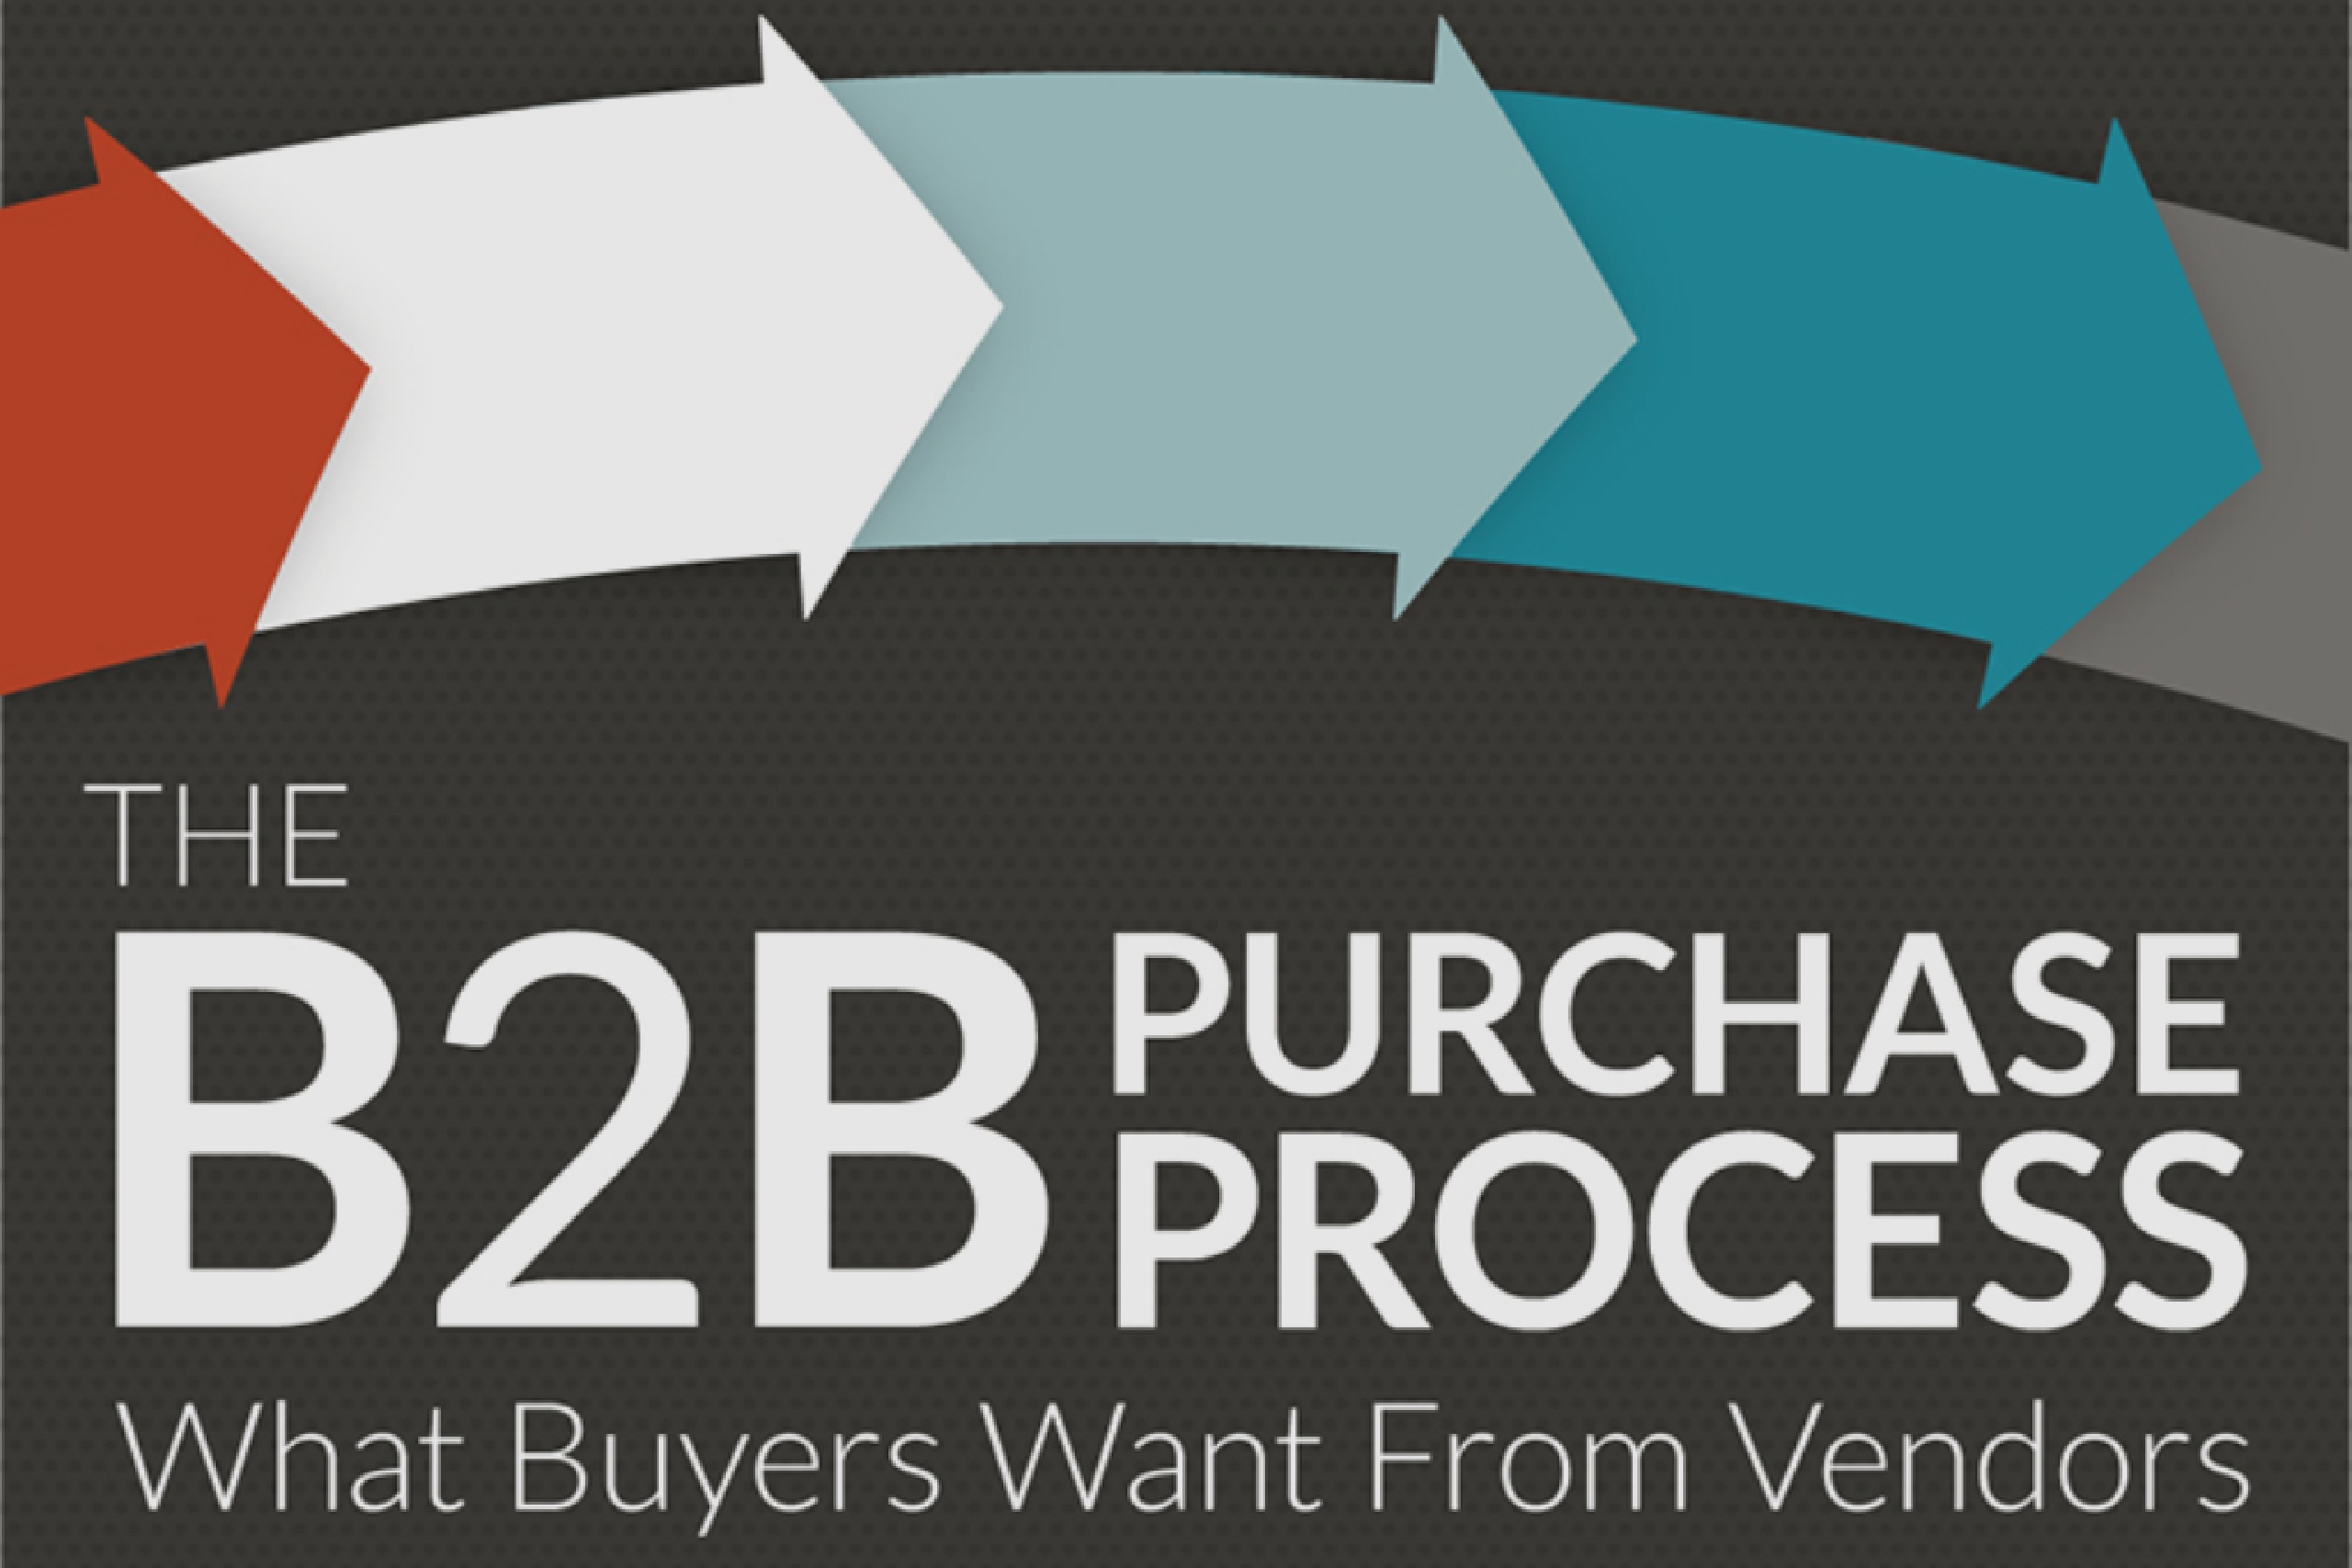 B2B Marketing Content: What Buyers Want from Vendors [infographic]